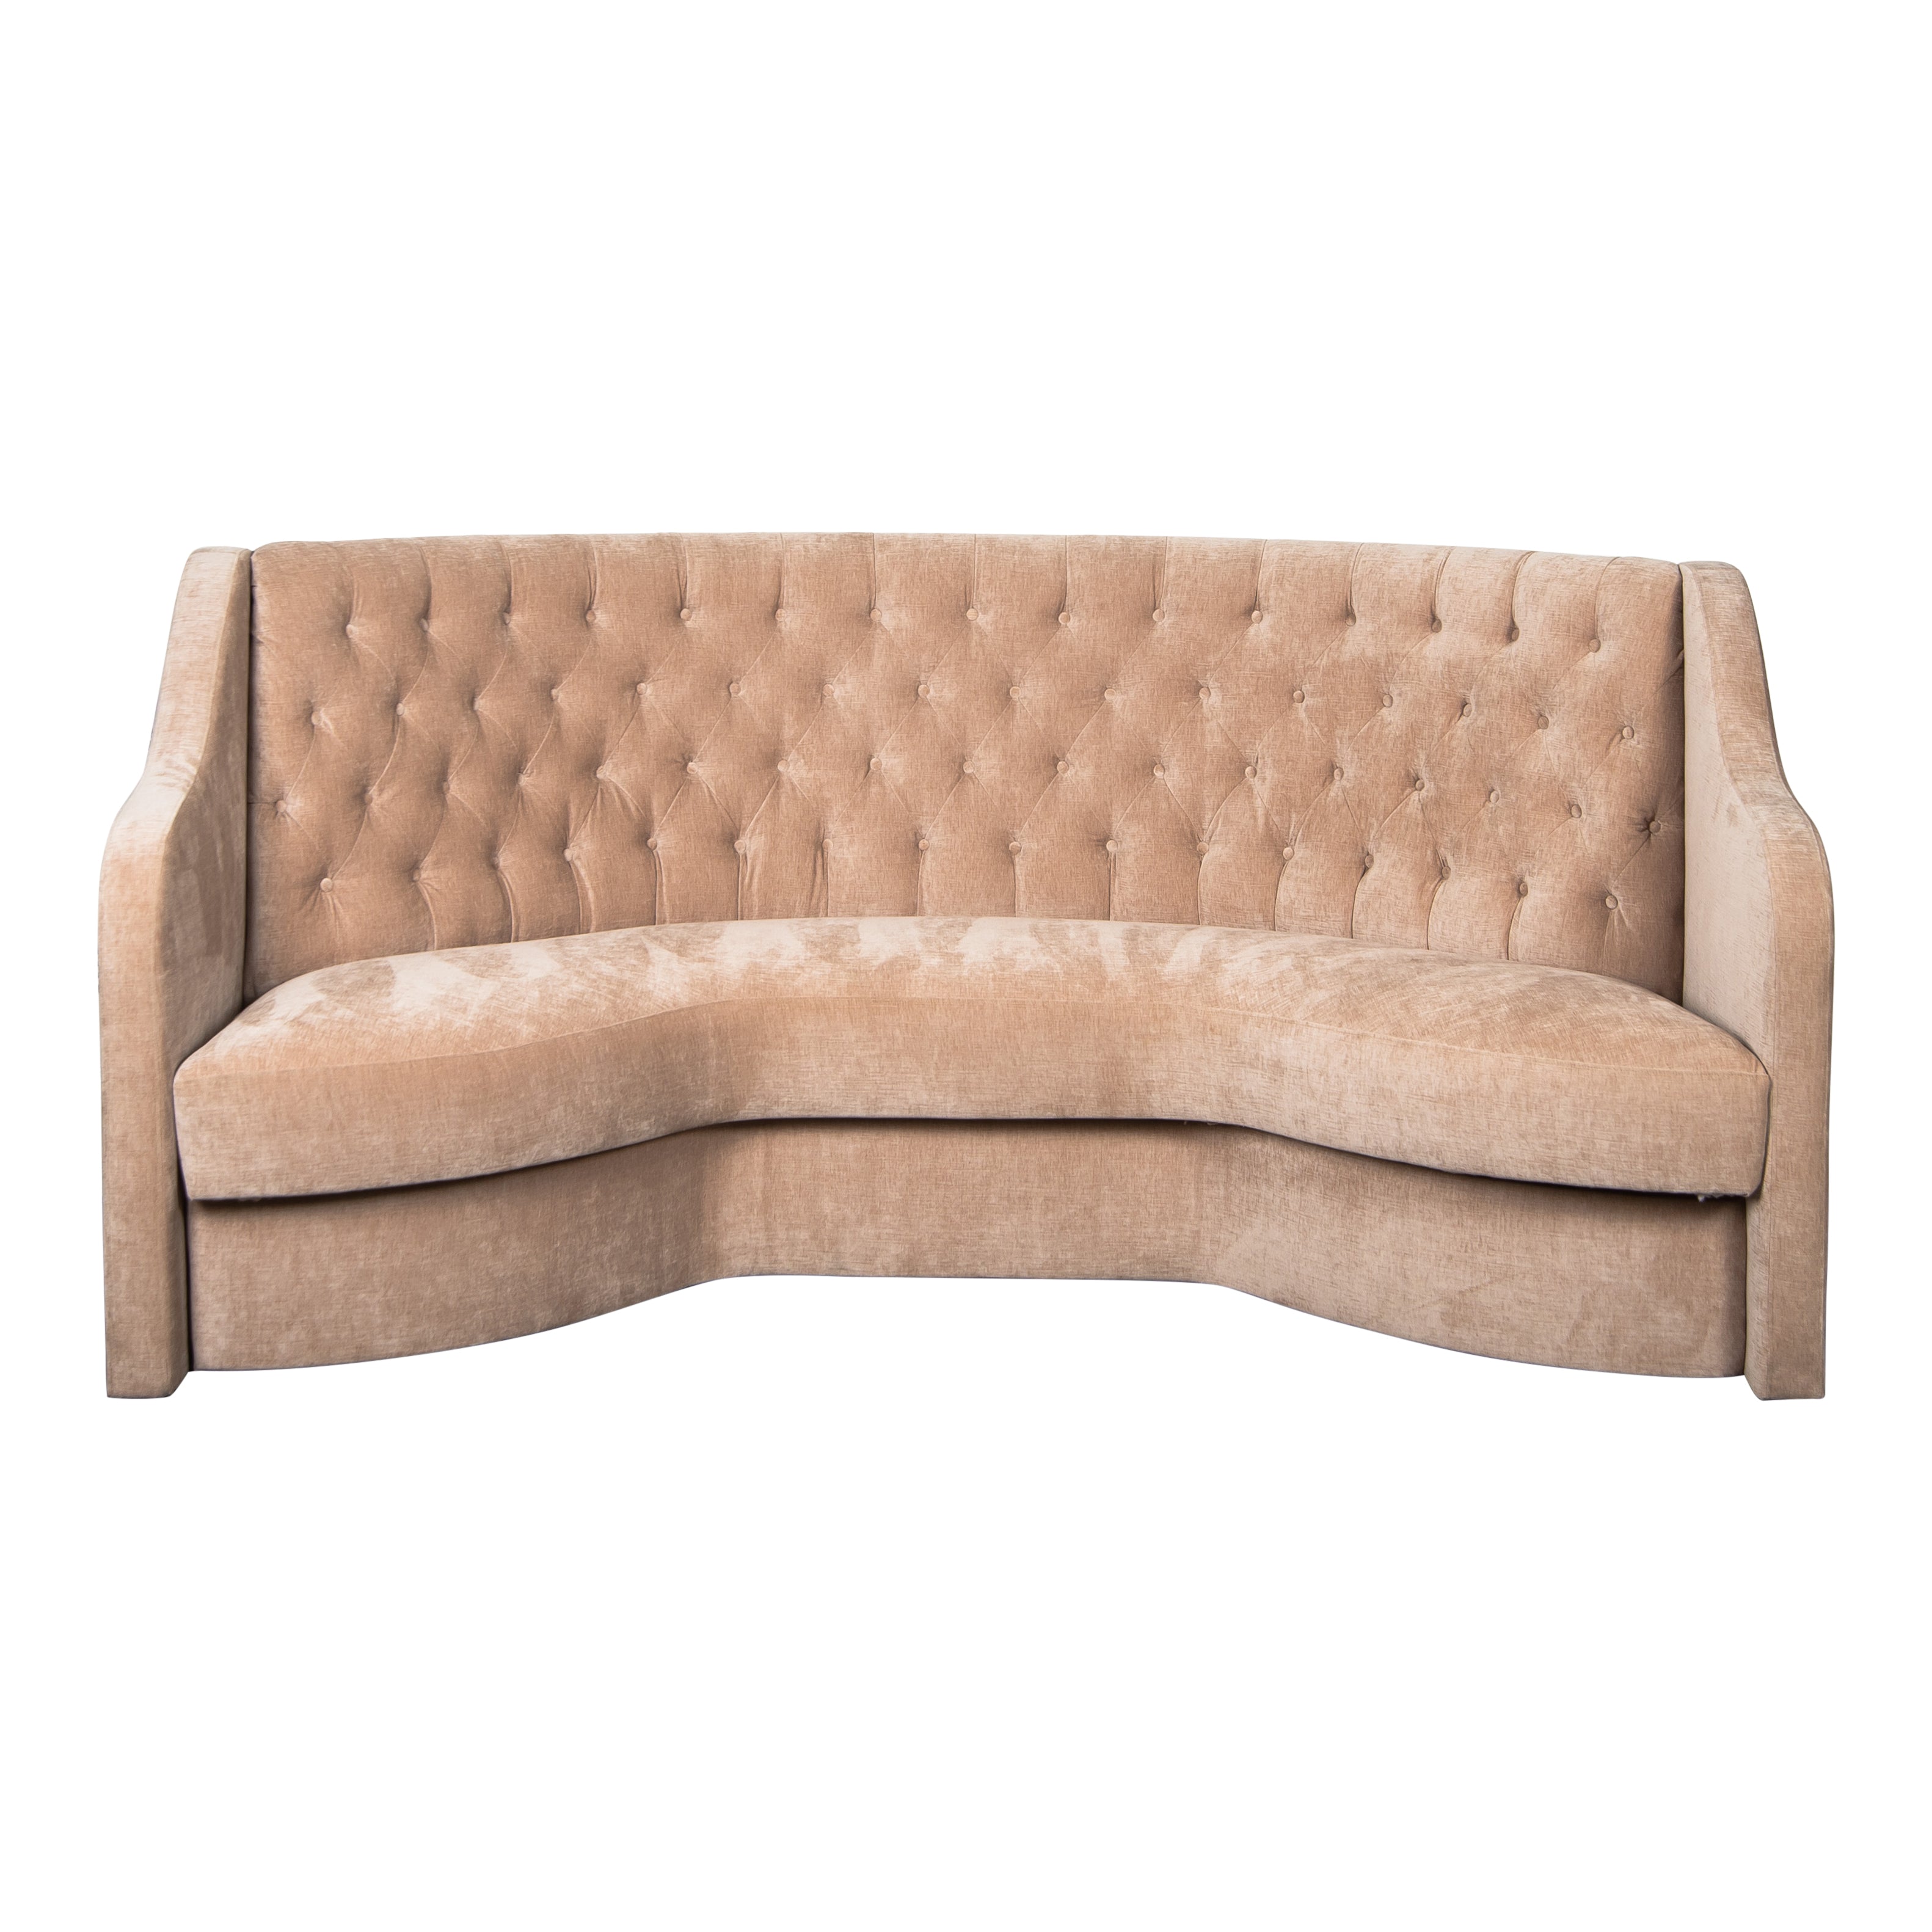 Fawn Banquette Couch